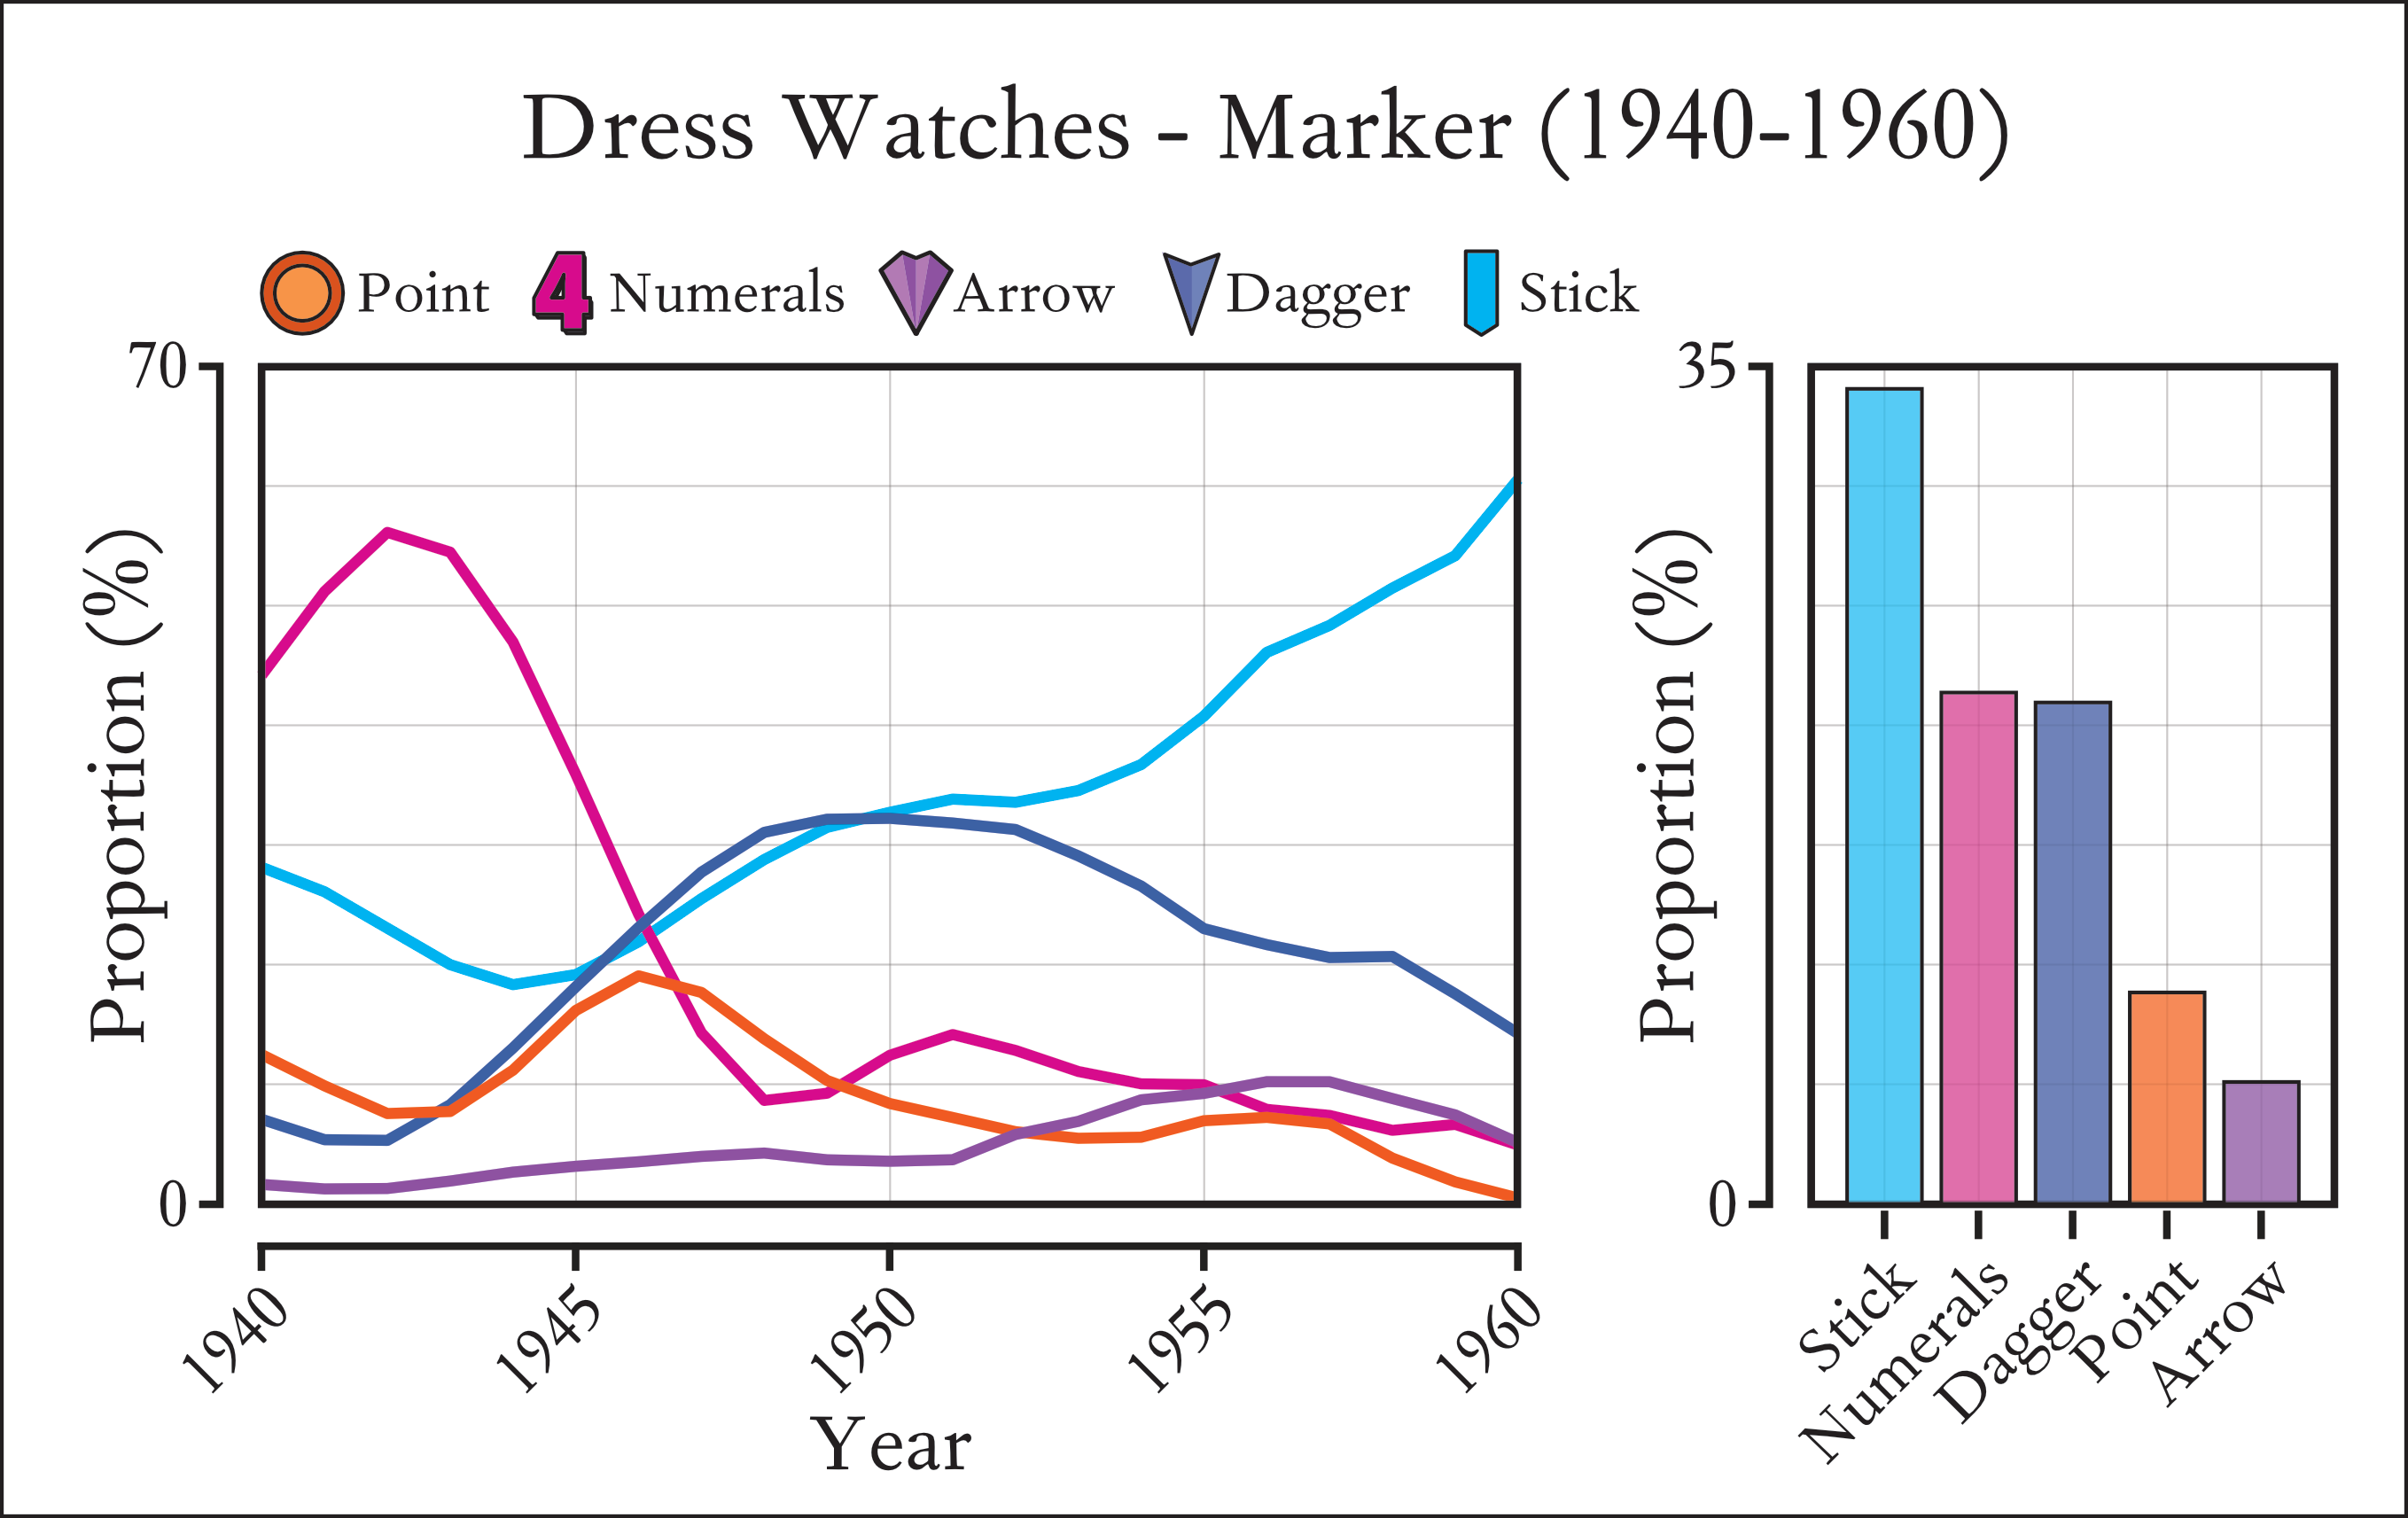 Distribution of Hour Marker popularity in Dress Watches between 1940 to 1960